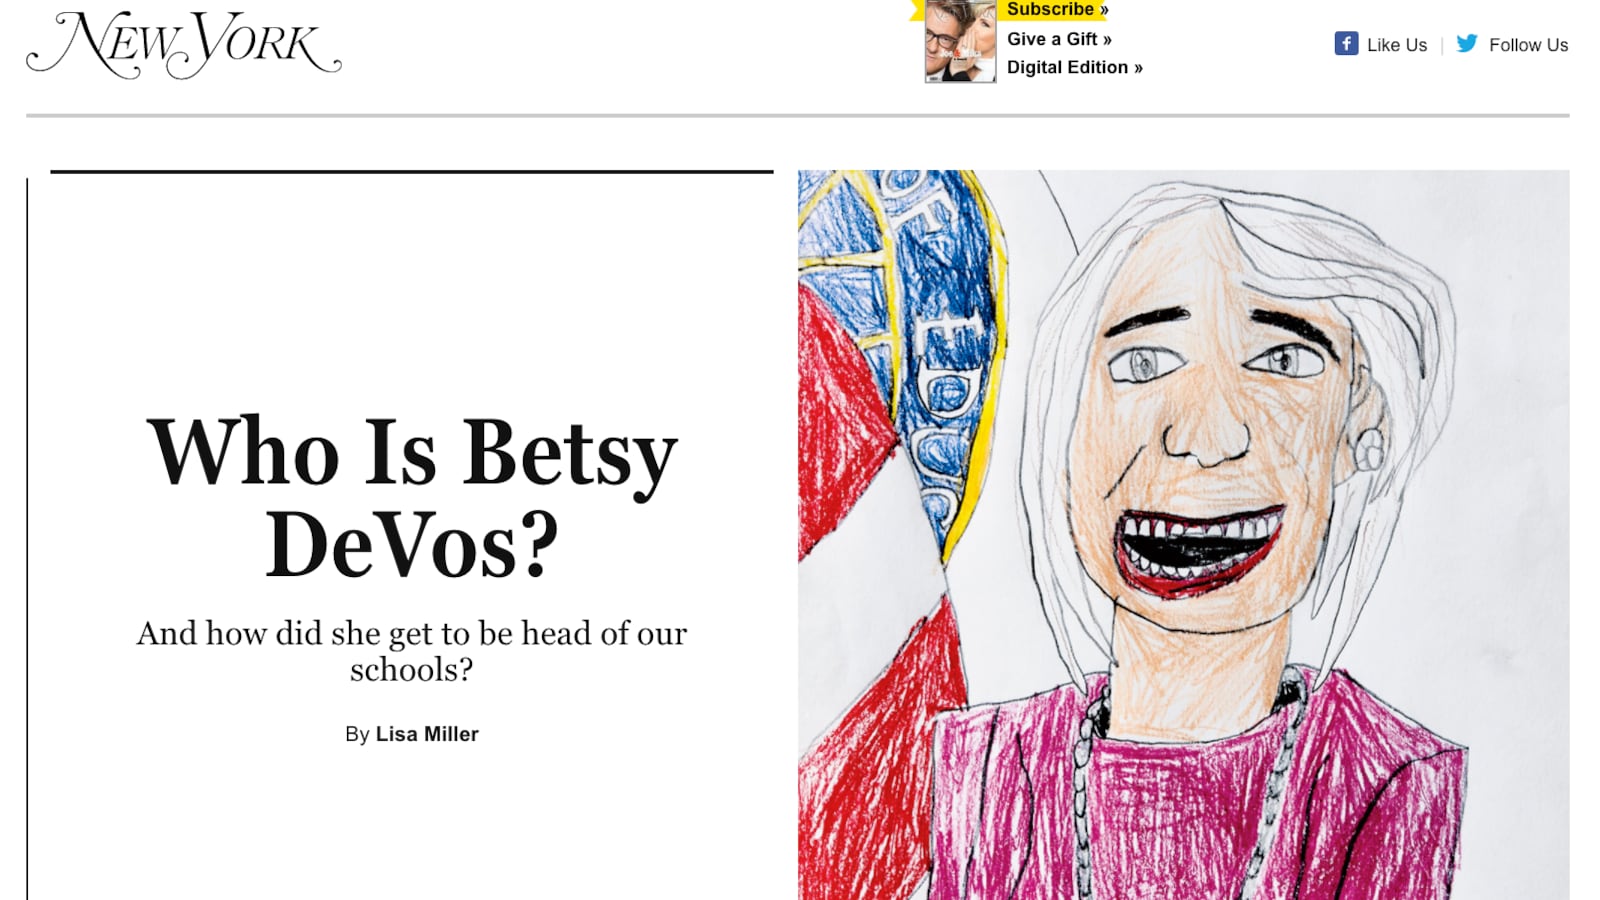 A drawing of DeVos commissioned by an 8-year-old starts the New York Magazine article.